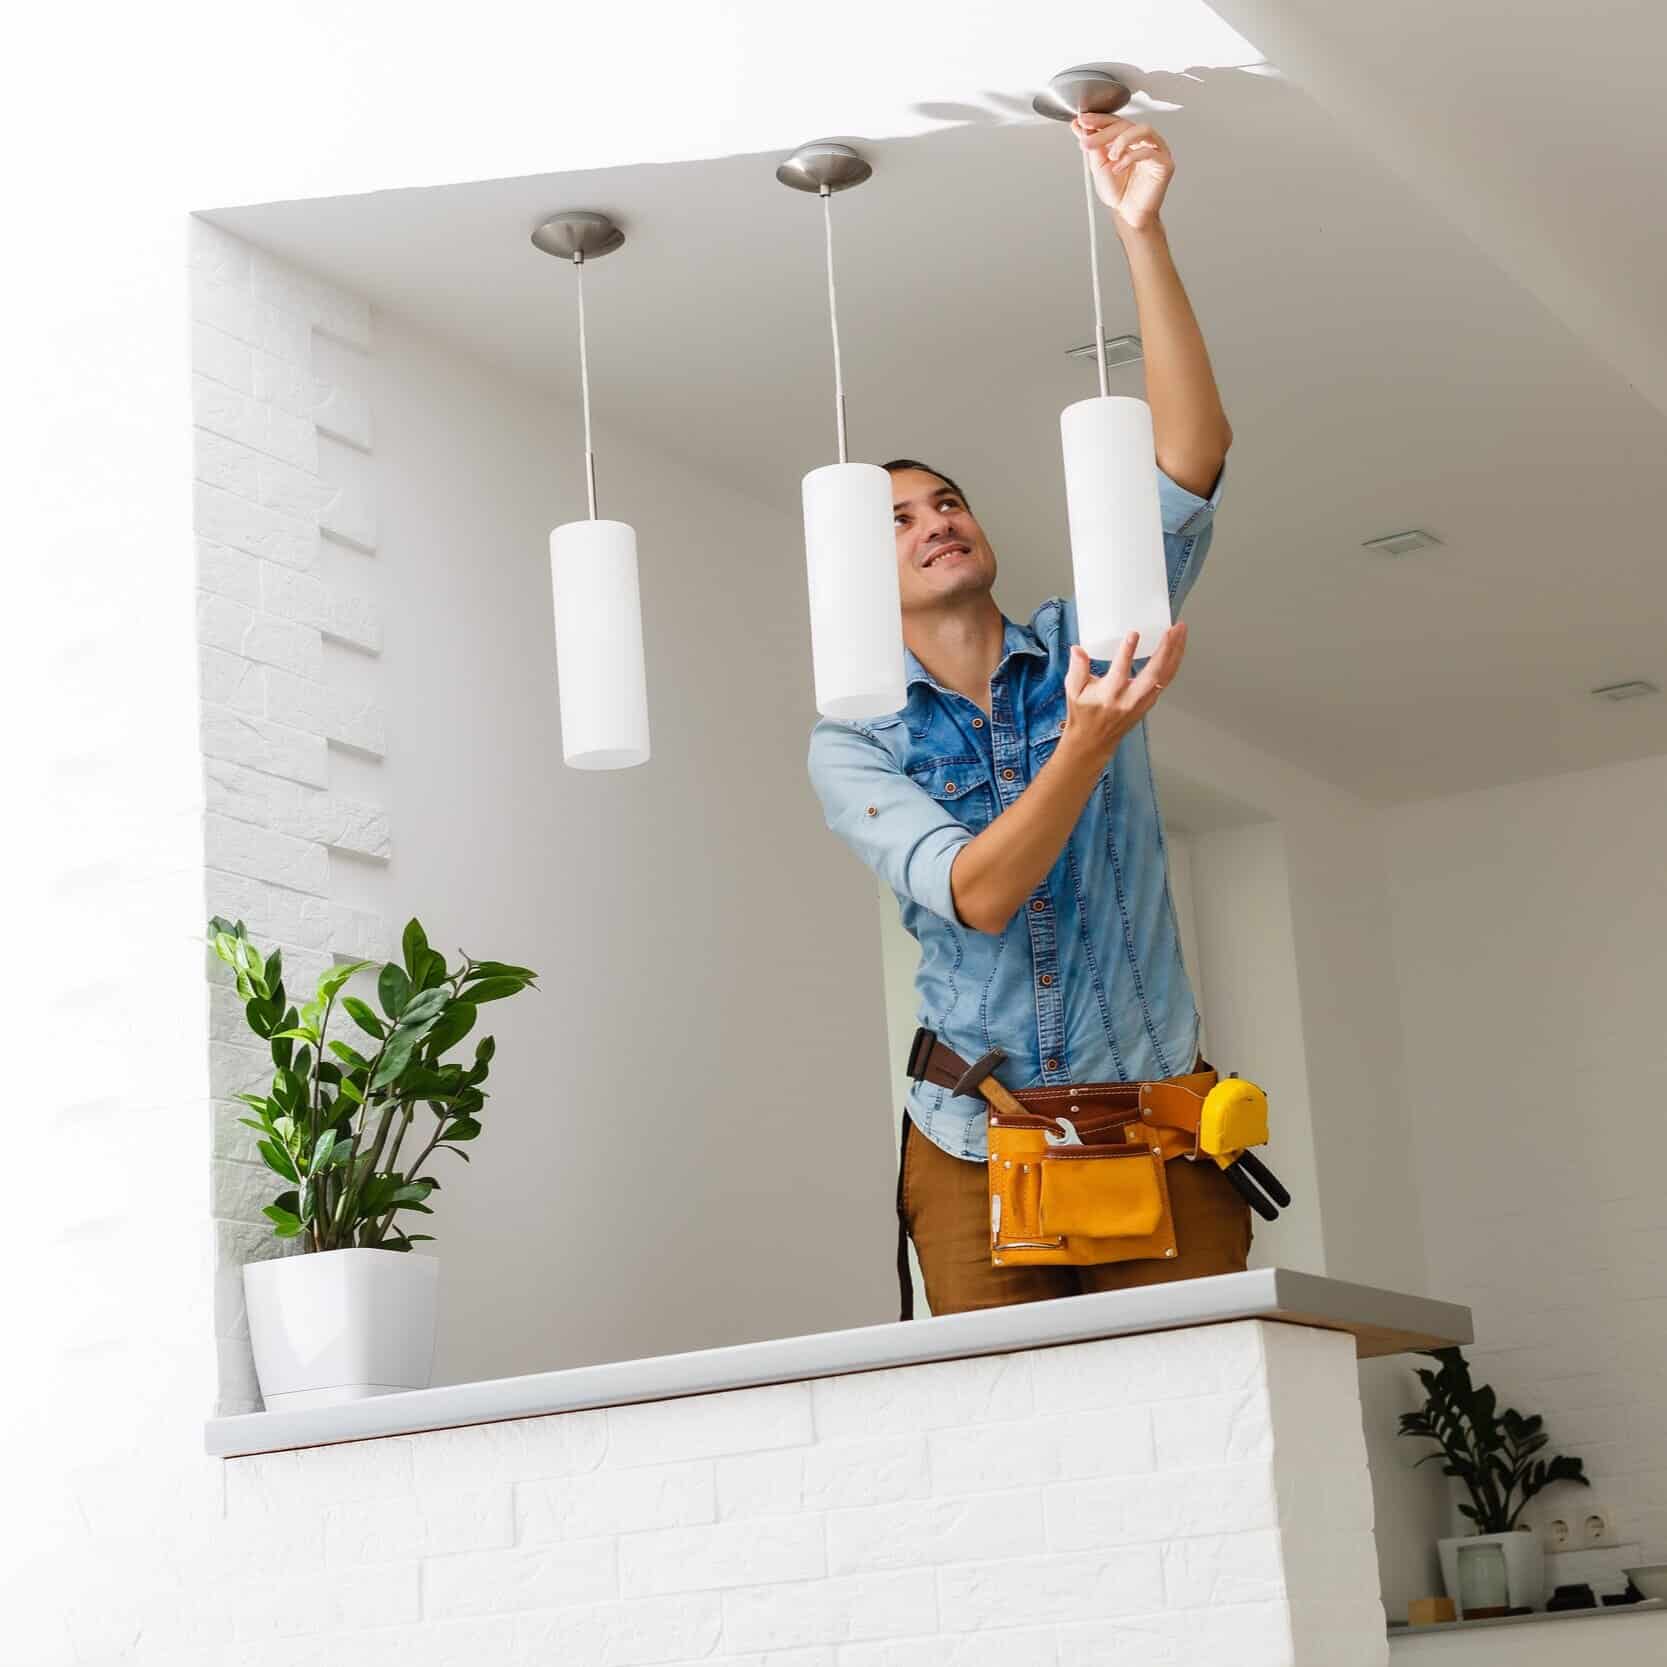 installing lighting fixtures in home — Professional Power Colorado